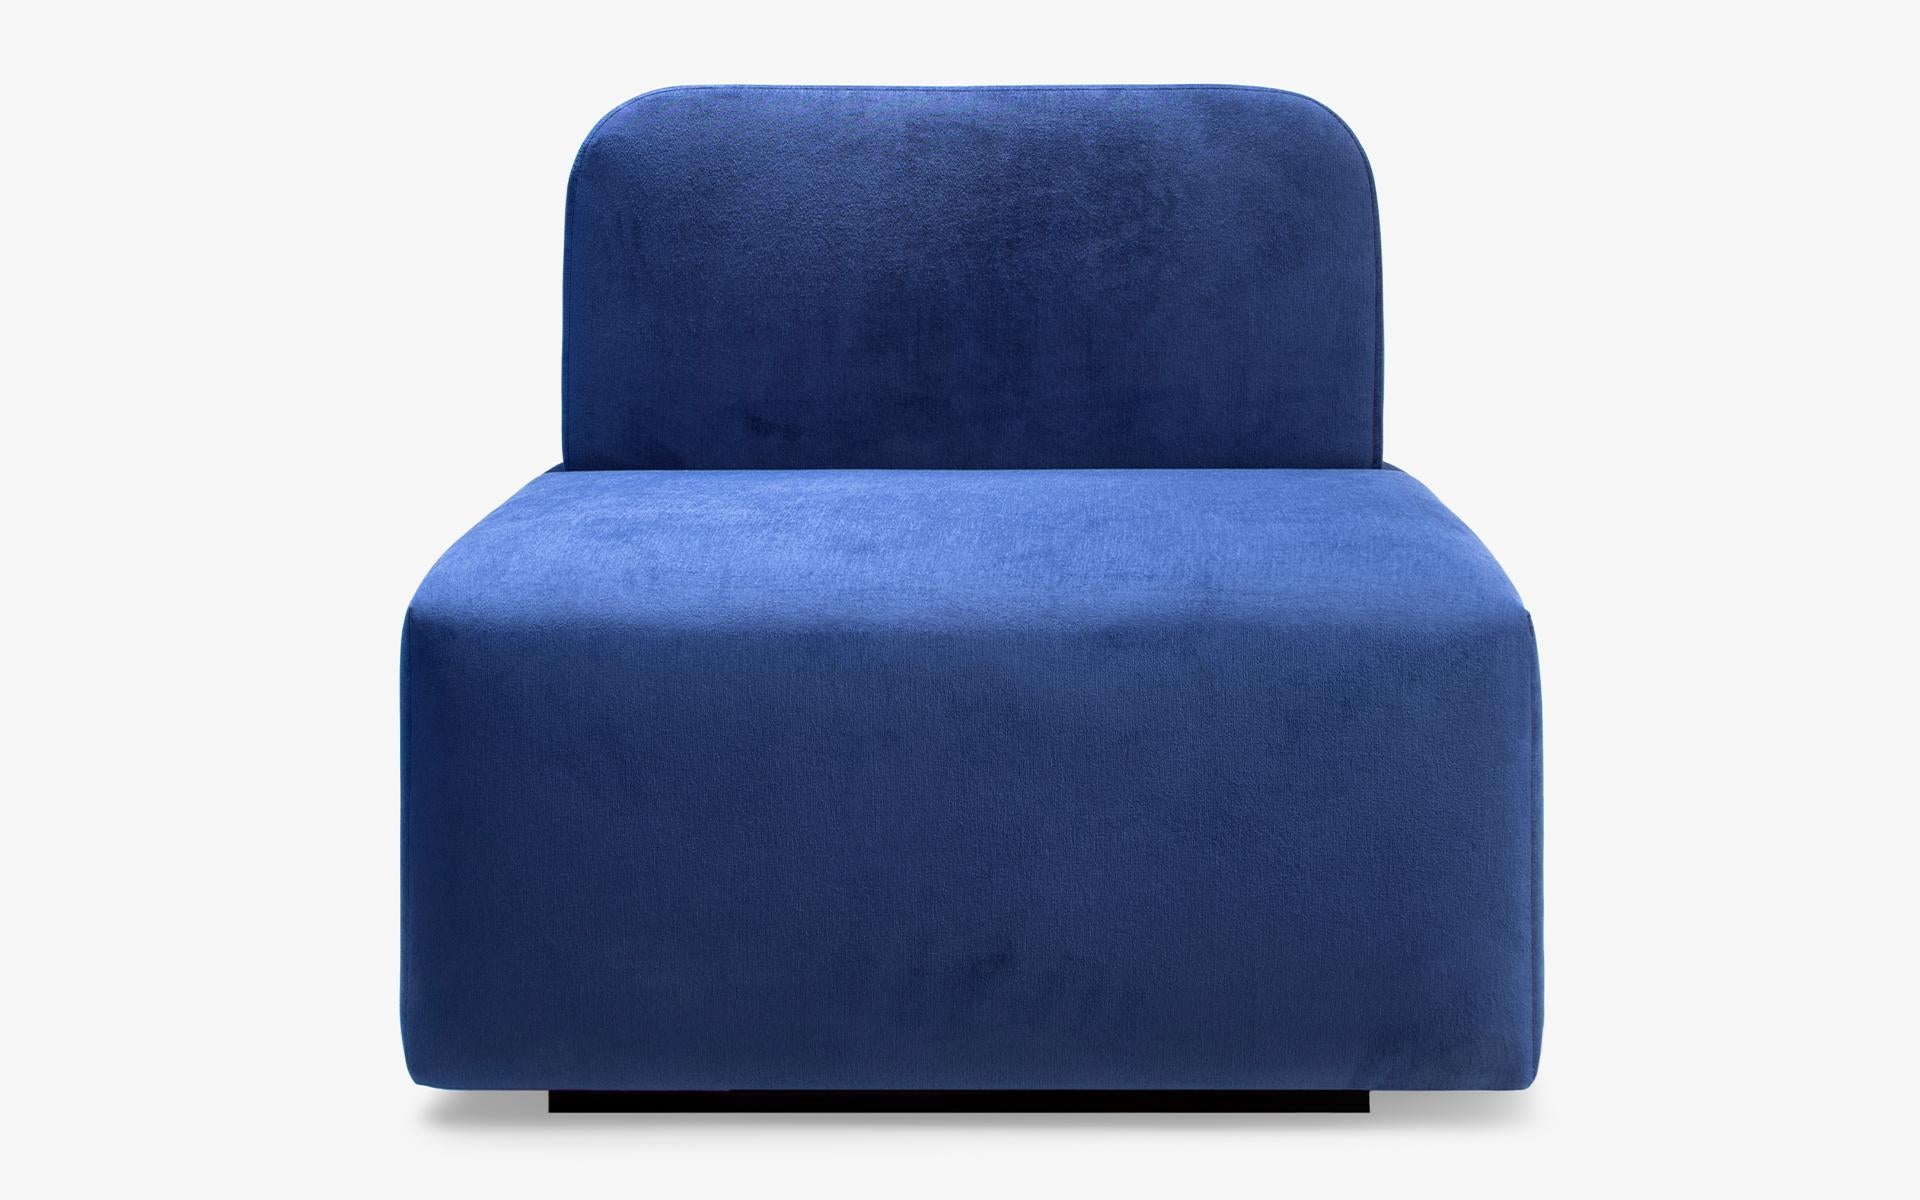 Hand-Crafted Dottie Blue Single Module Seating For Sale